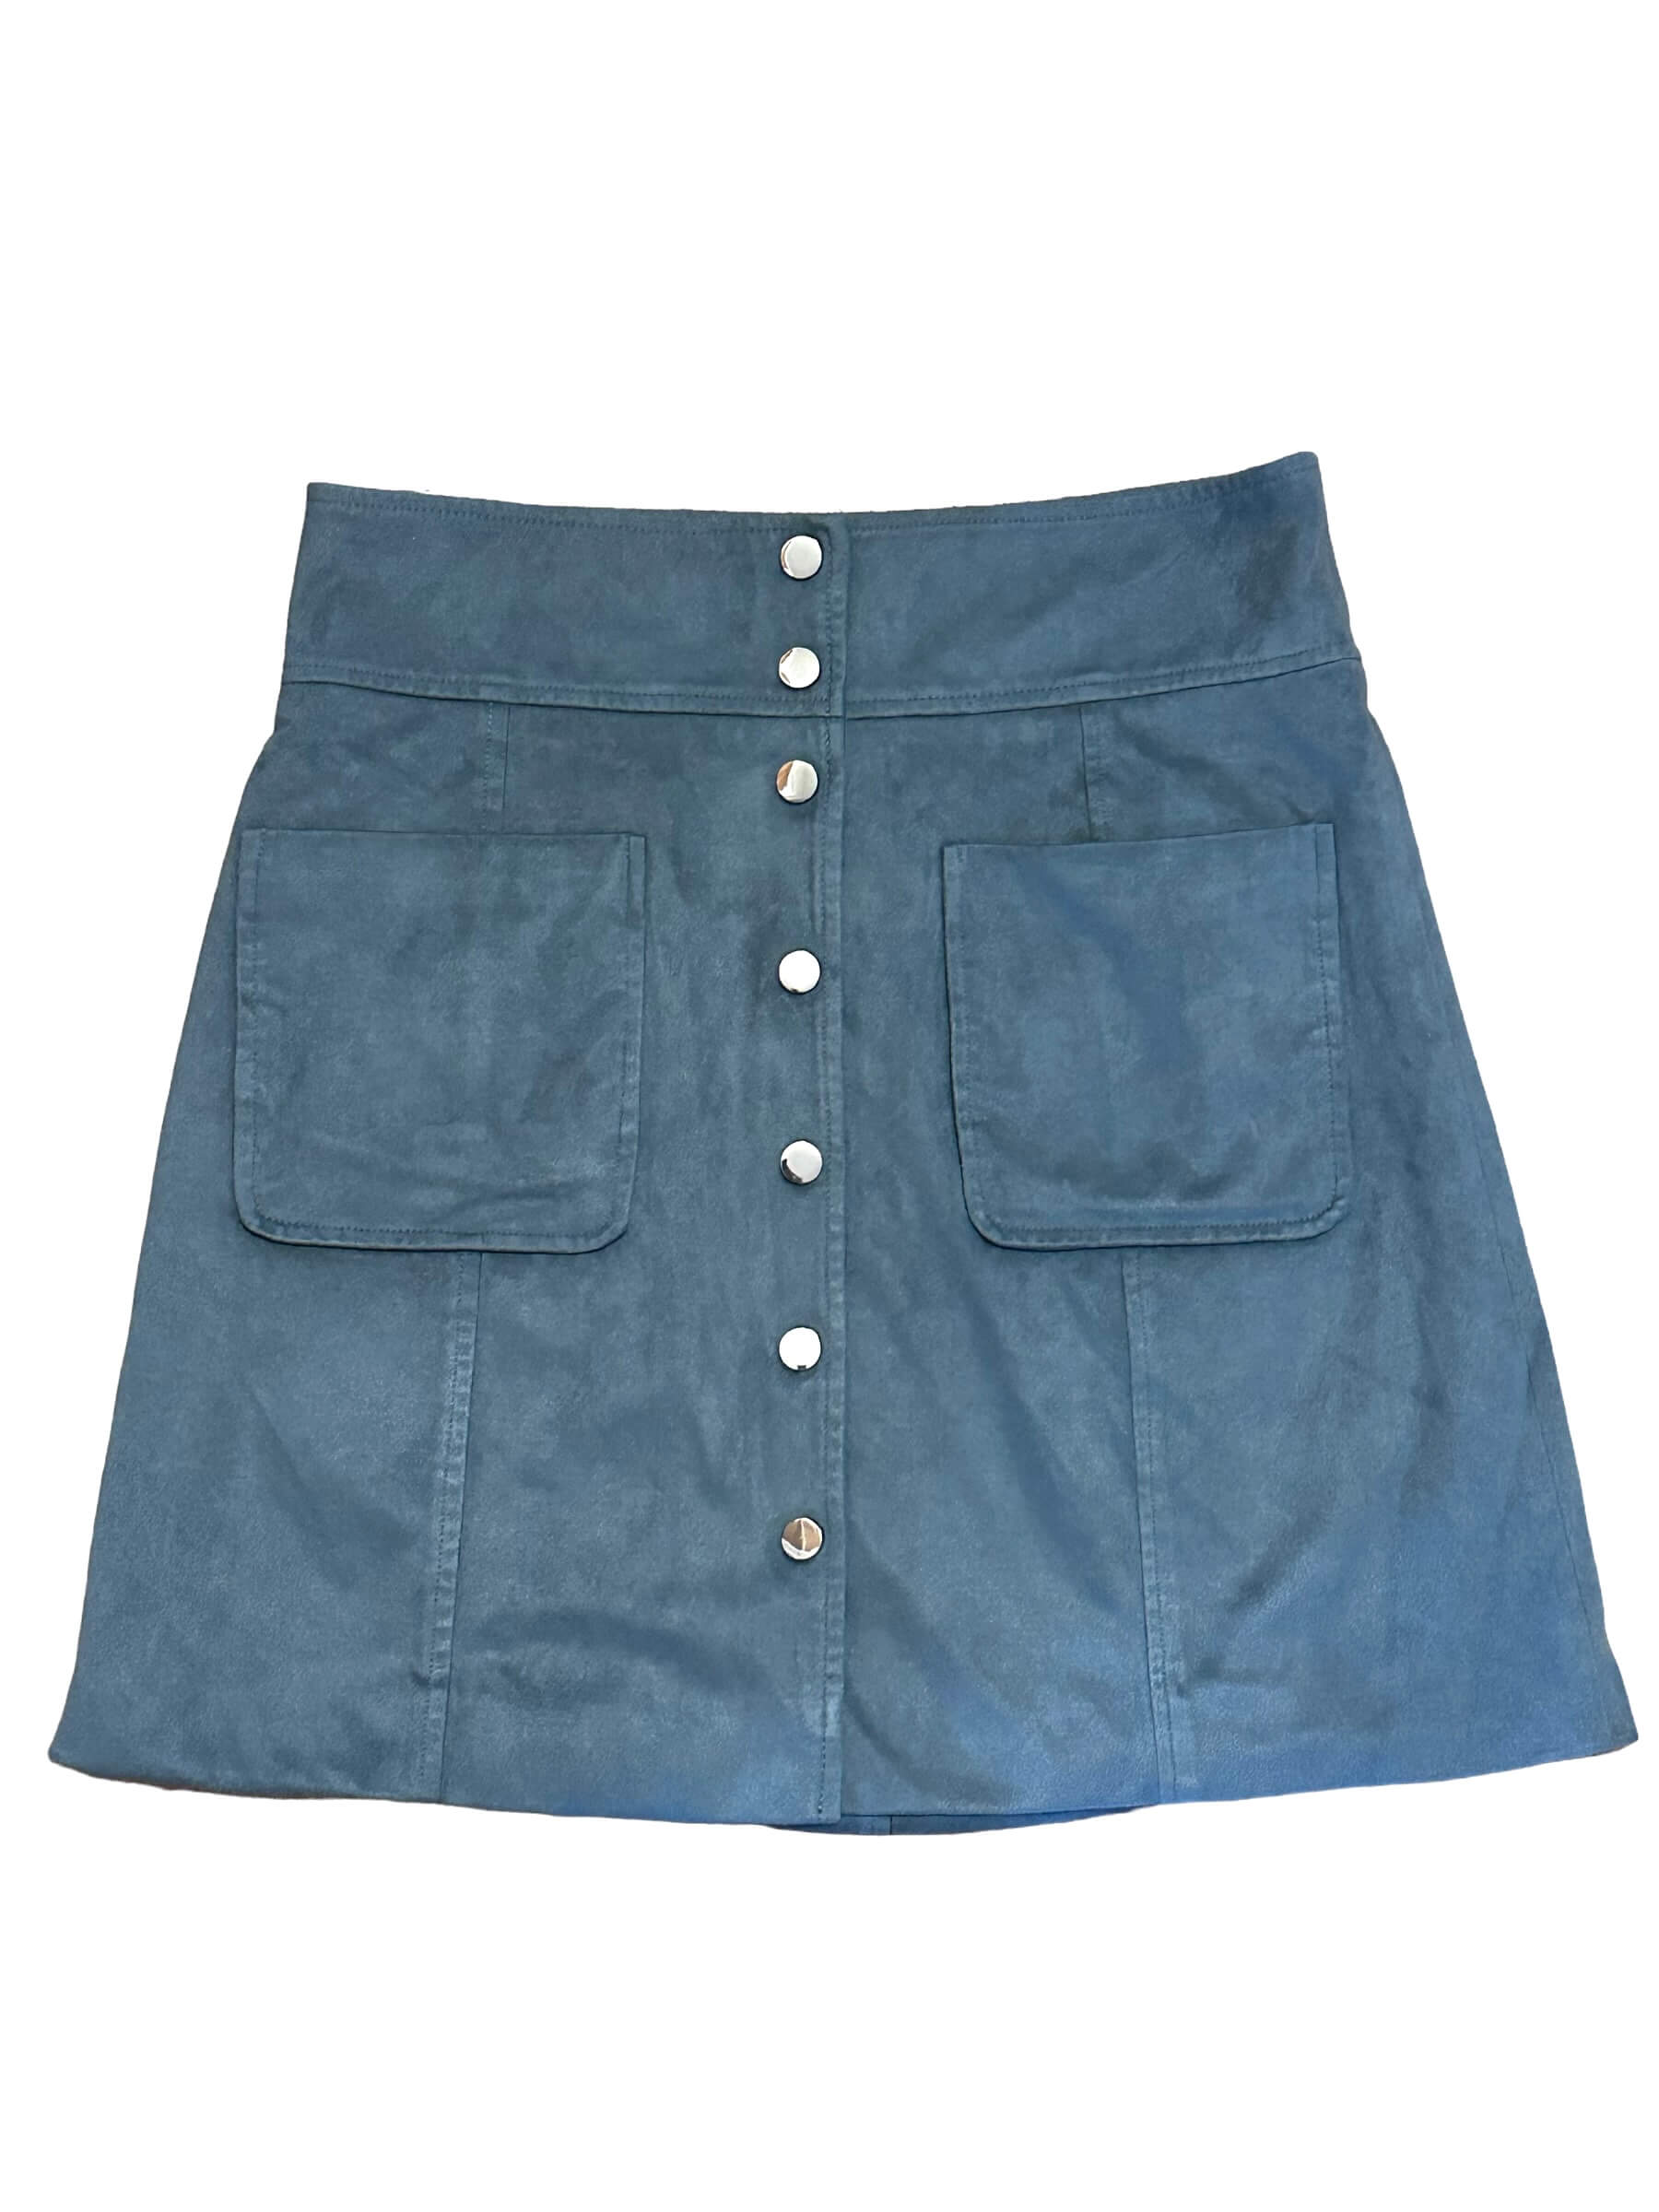 Soft Summer BAGATELLE blue spruce faux suede snap up mini skirt